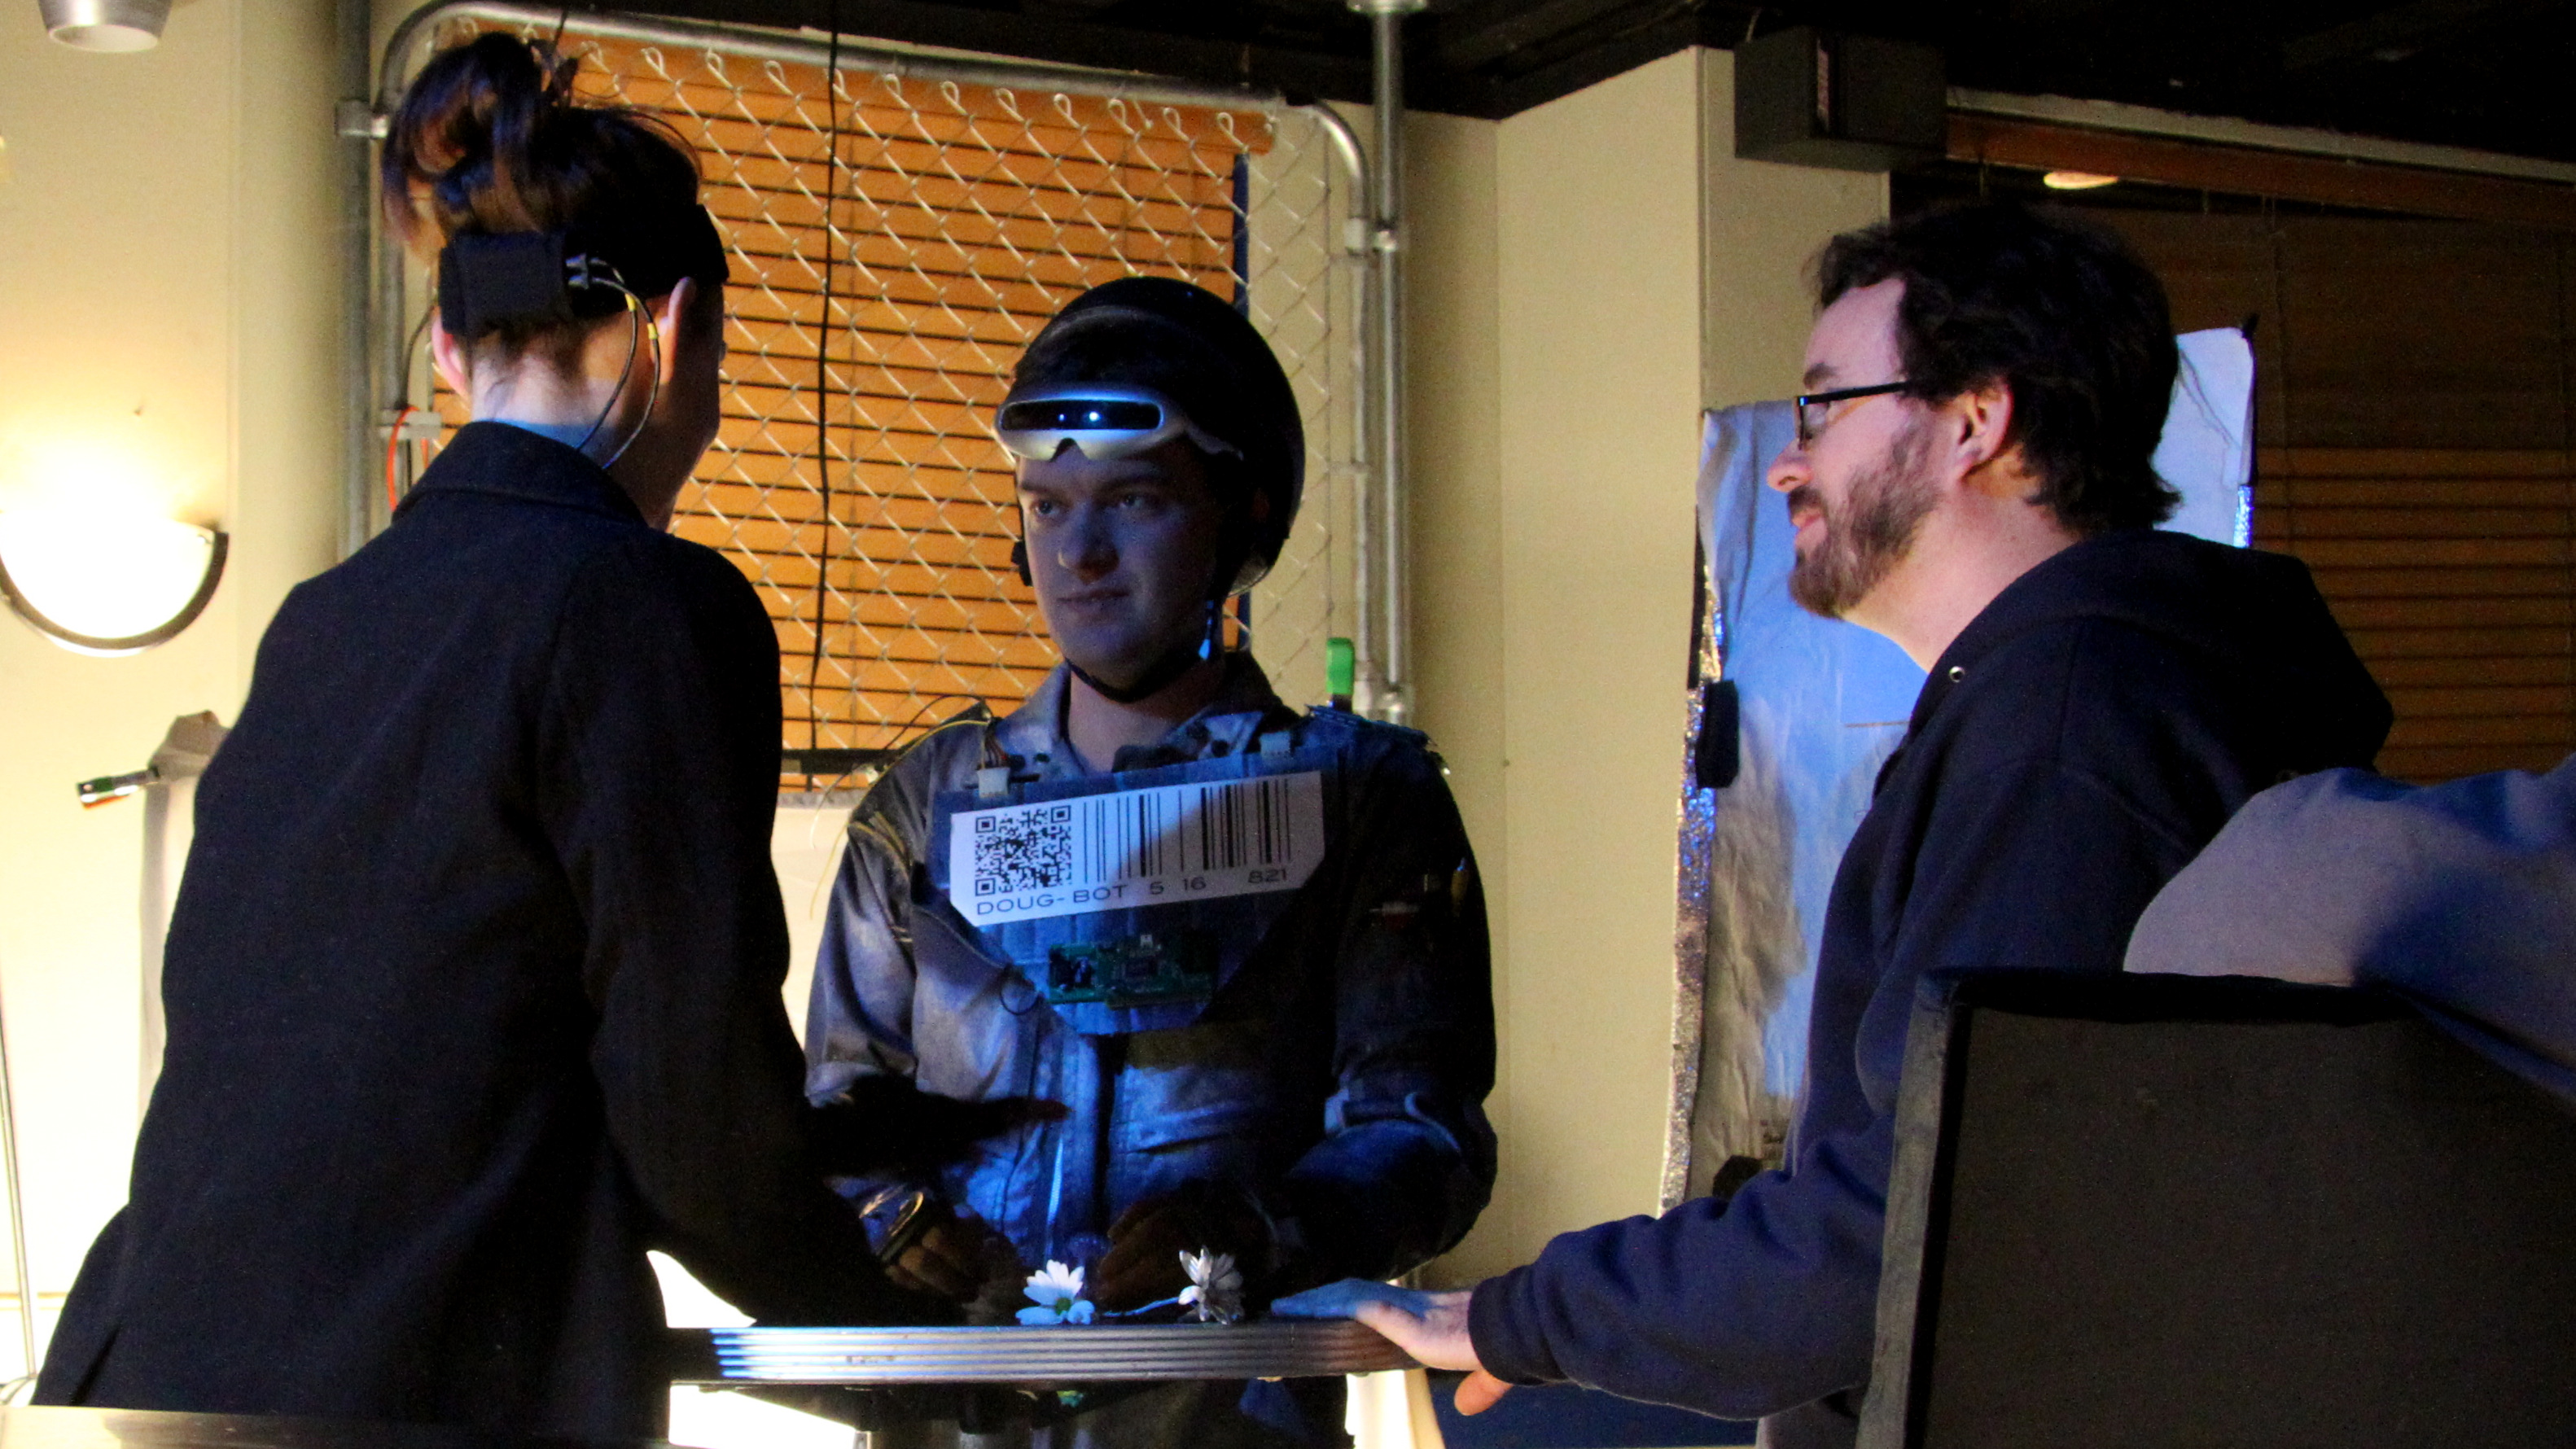 Alex Griffin, director, with actors Kelly Russo and Russell Nauman on the set of the live action/motion capture hybrid 'Some Like it BOT!'